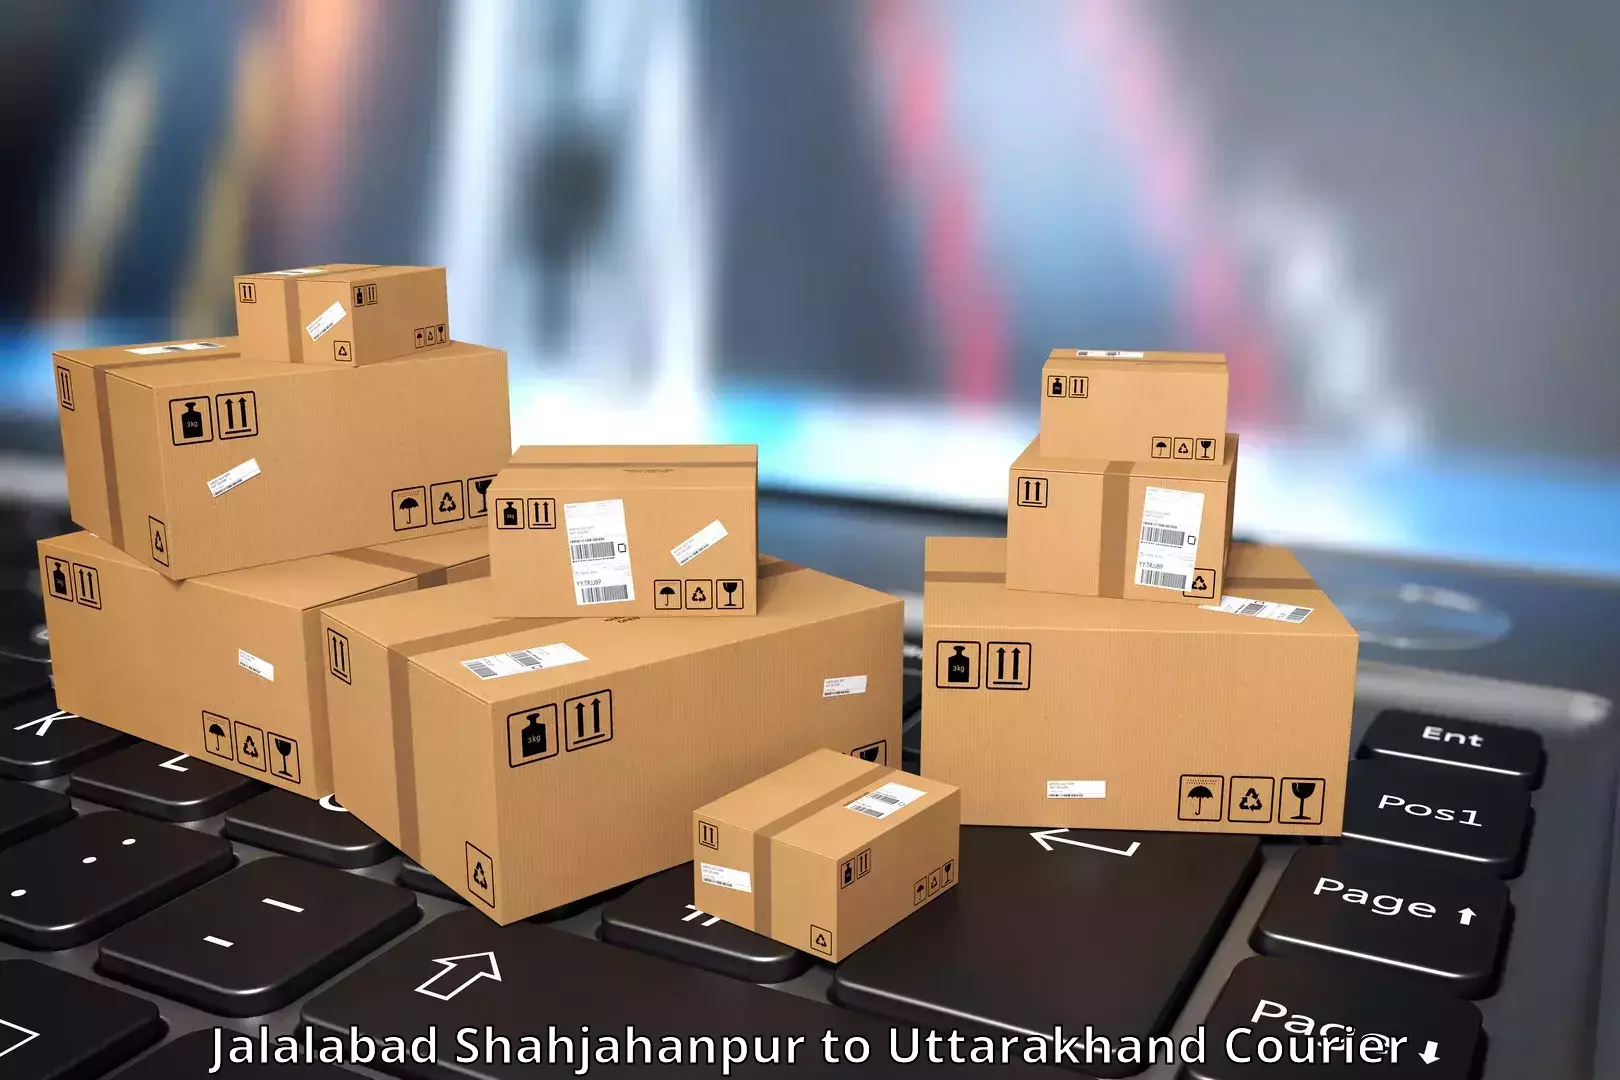 State-of-the-art courier technology in Jalalabad Shahjahanpur to Tehri Garhwal